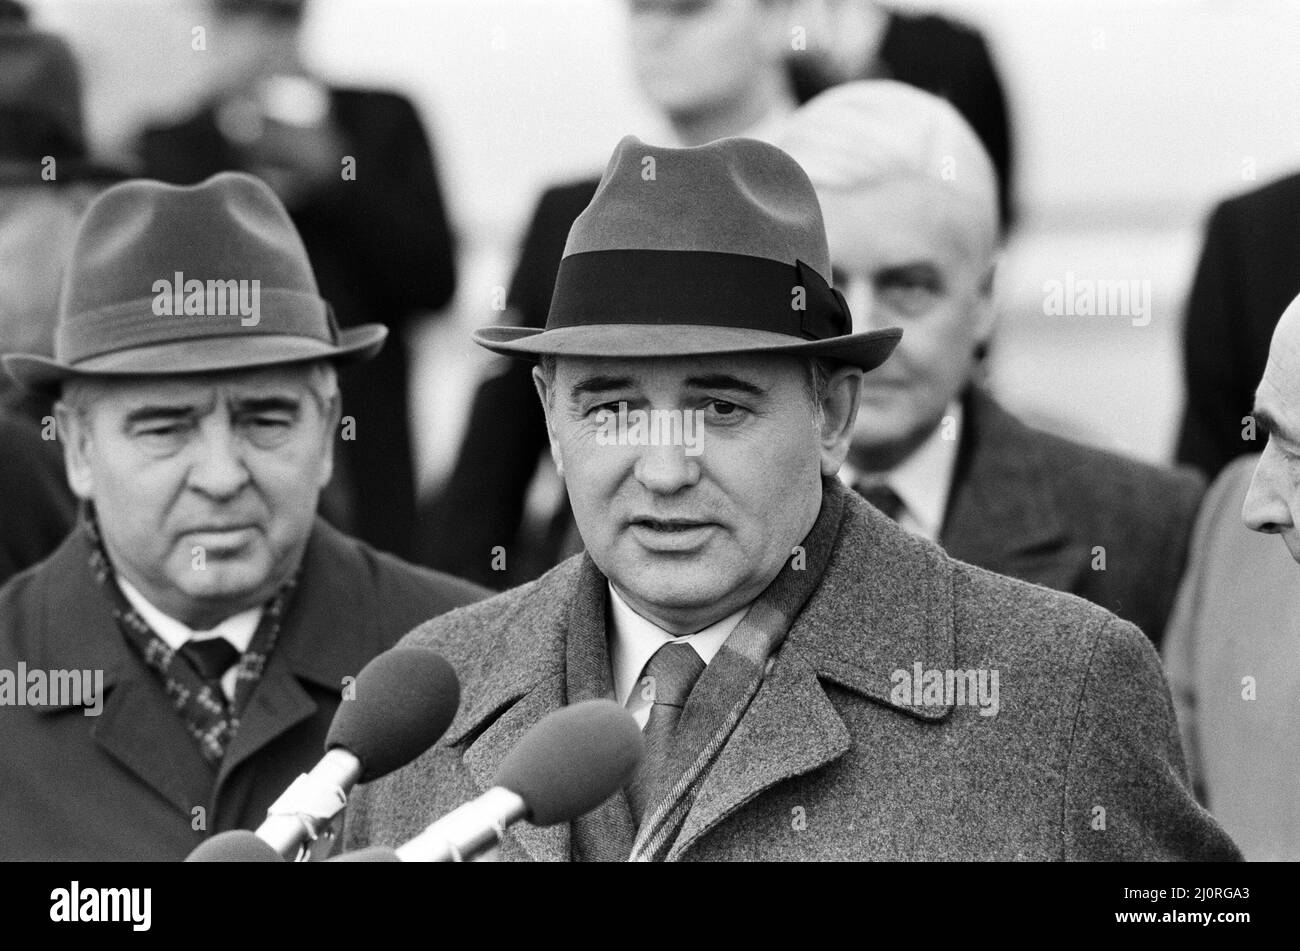 Russian politician Mikhail Gorbachev, who is a member of the Politburo, arrives in London for an official visit. 15th December 1984. Stock Photo